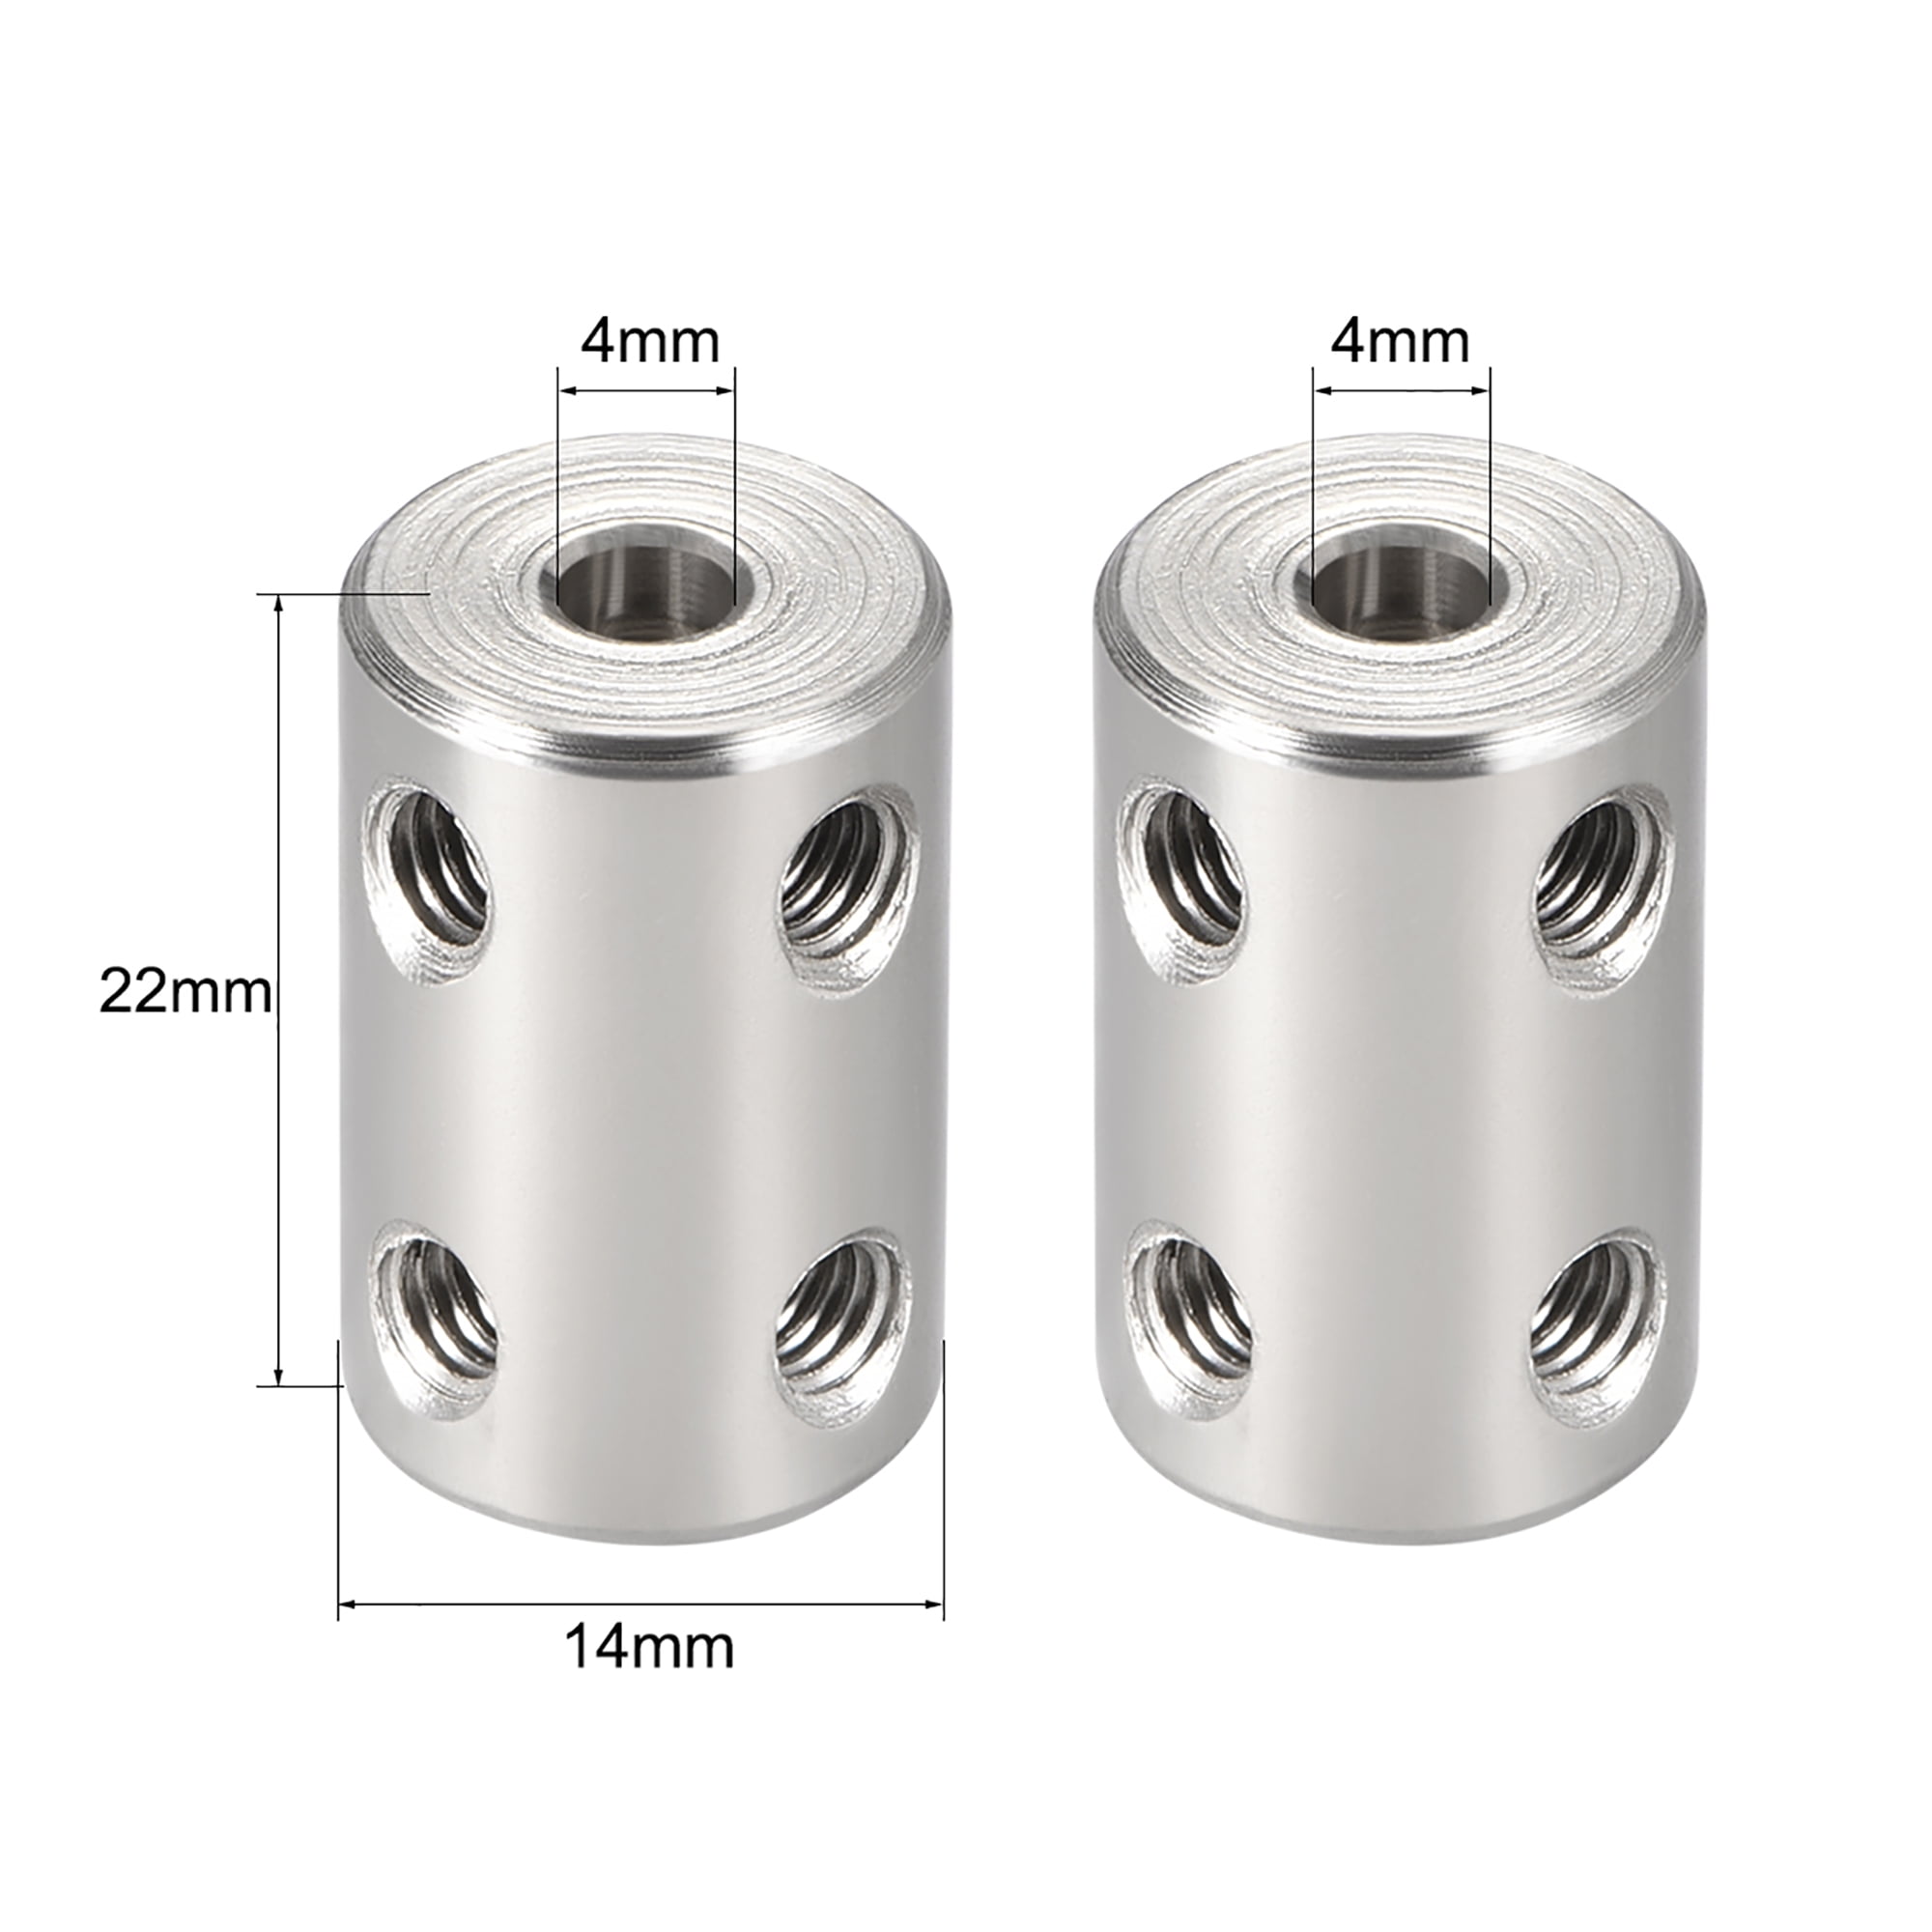 Shaft Coupling 4mm to 4mm Bore L22xD14 Robot Motor Wheel Rigid Coupler Connector 